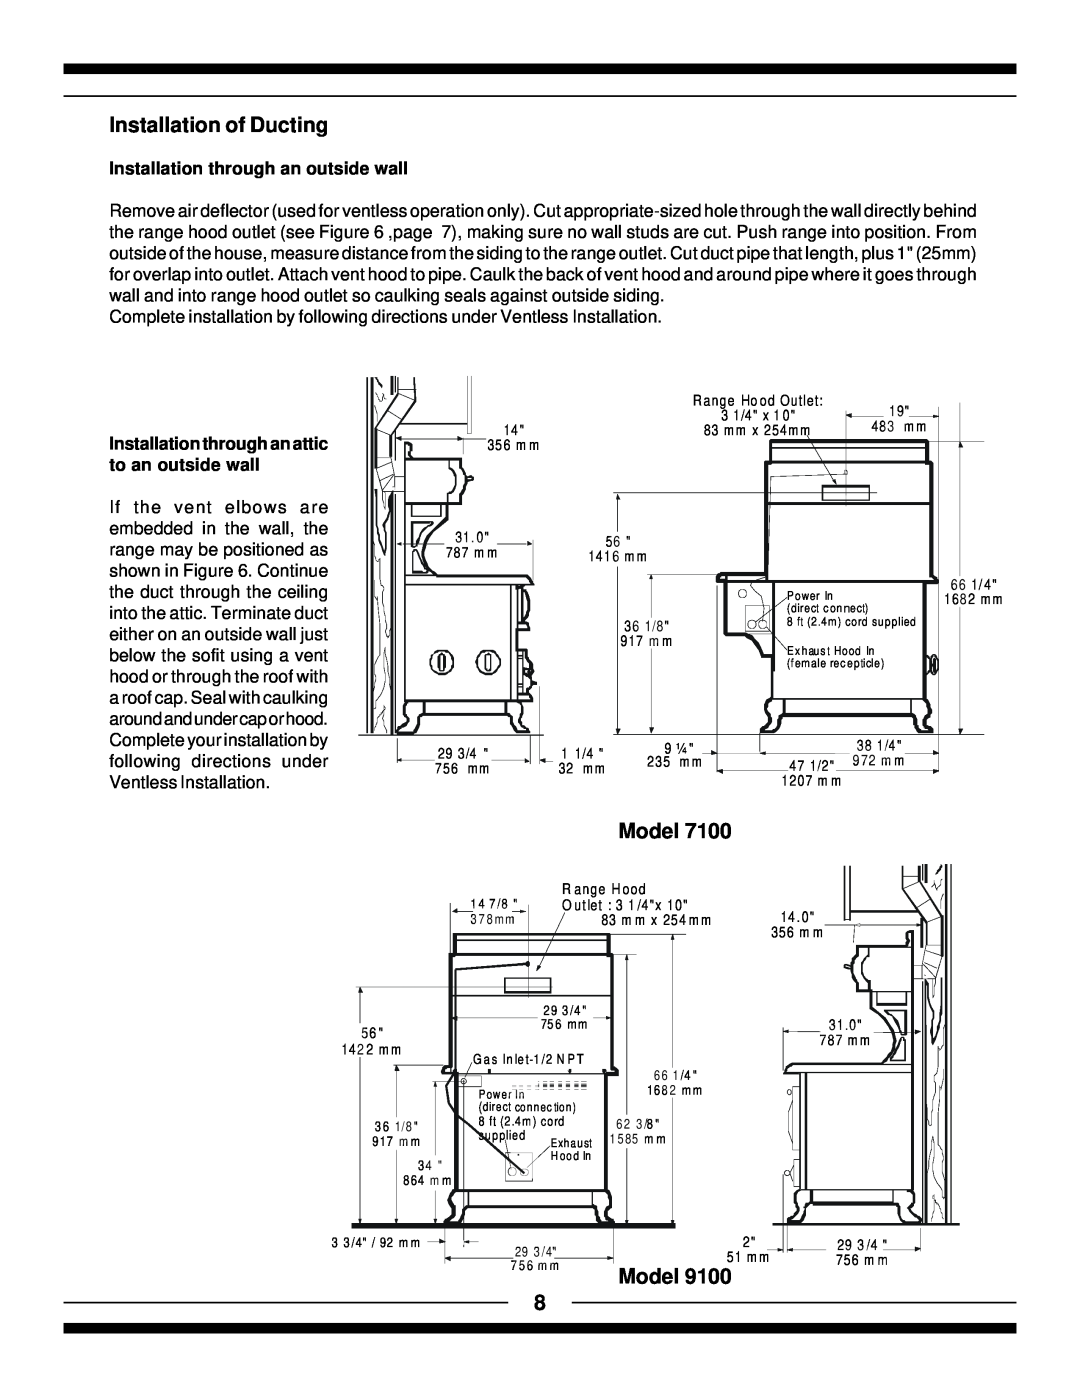 Hearth and Home Technologies 7100, 9100 manual Installation of Ducting, Model, Installation through an outside wall 